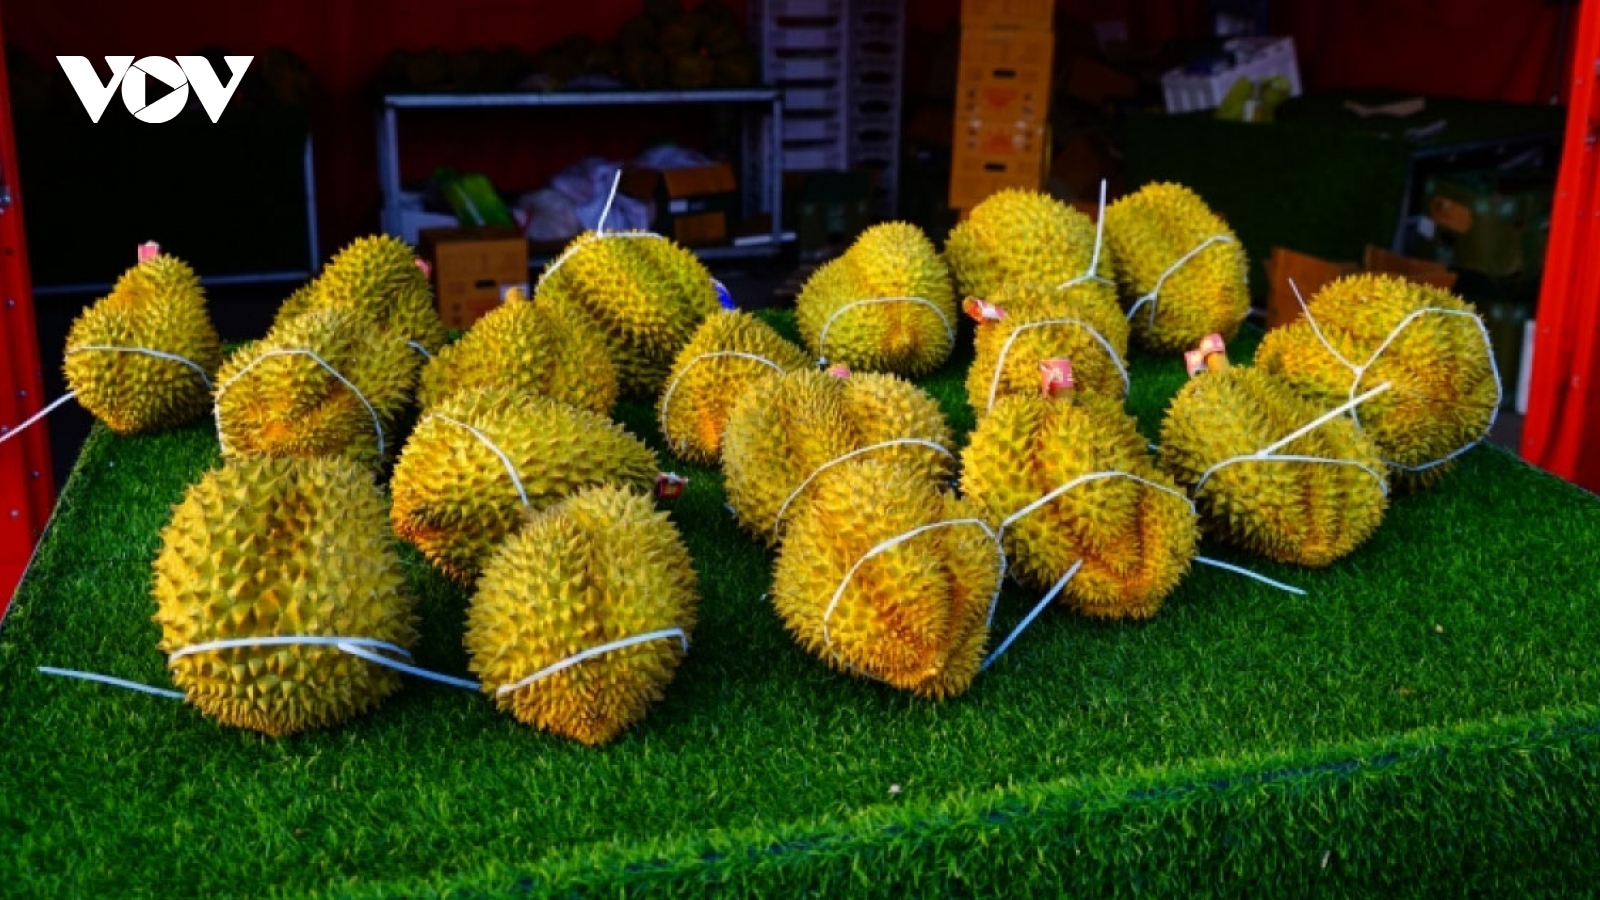 Vietnam durian and fruit festival opens in Tianjin